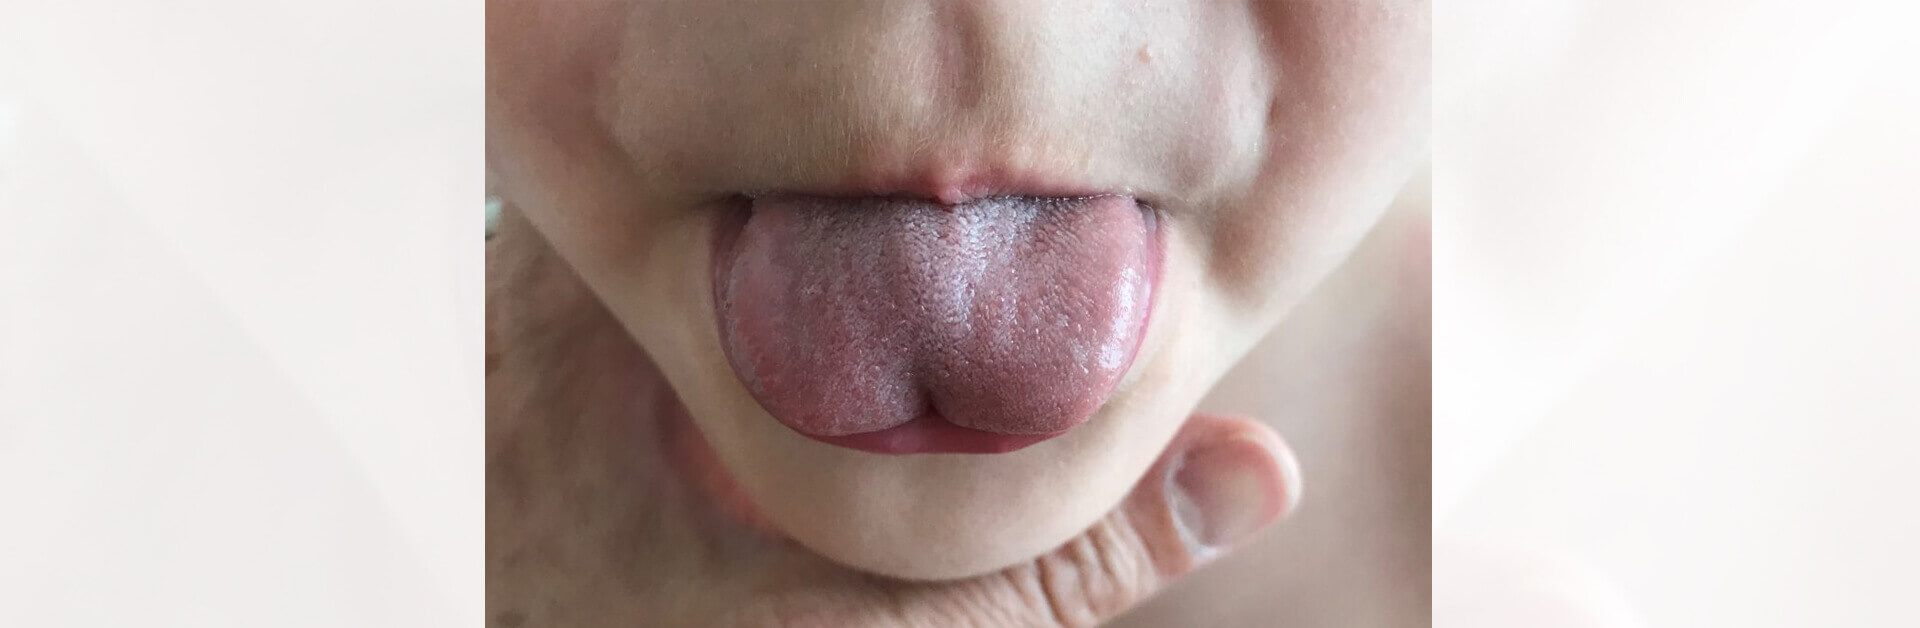 WHAT EXACTLY IS A TONGUE TIE? HOW DOES IT AFFECT US?